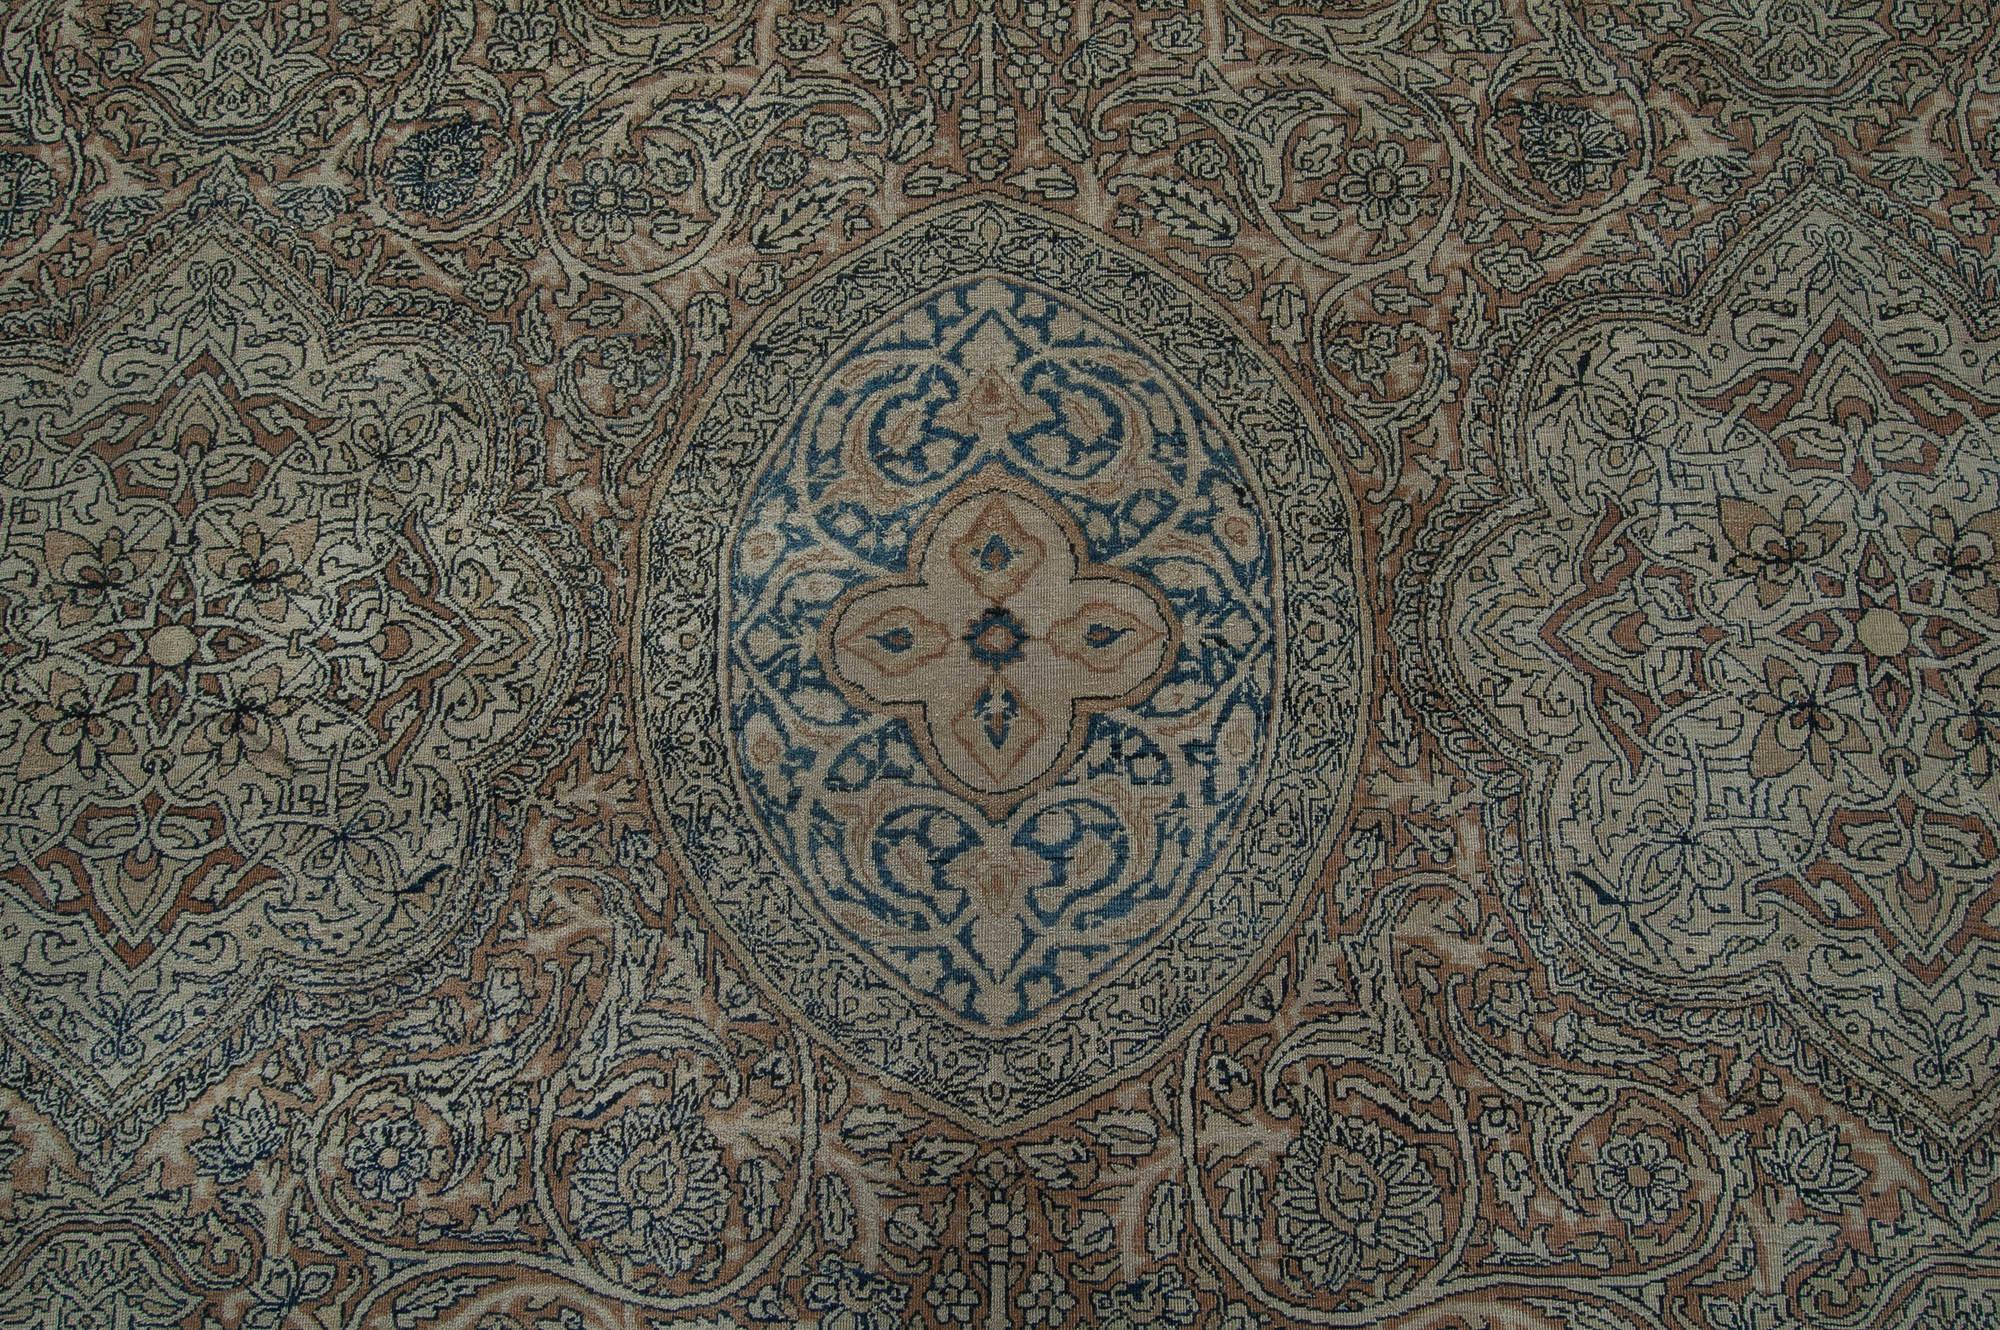 Authentic 19th Century Persian Kirman Bold Blue Brown Wool Rug
Size: 13'10